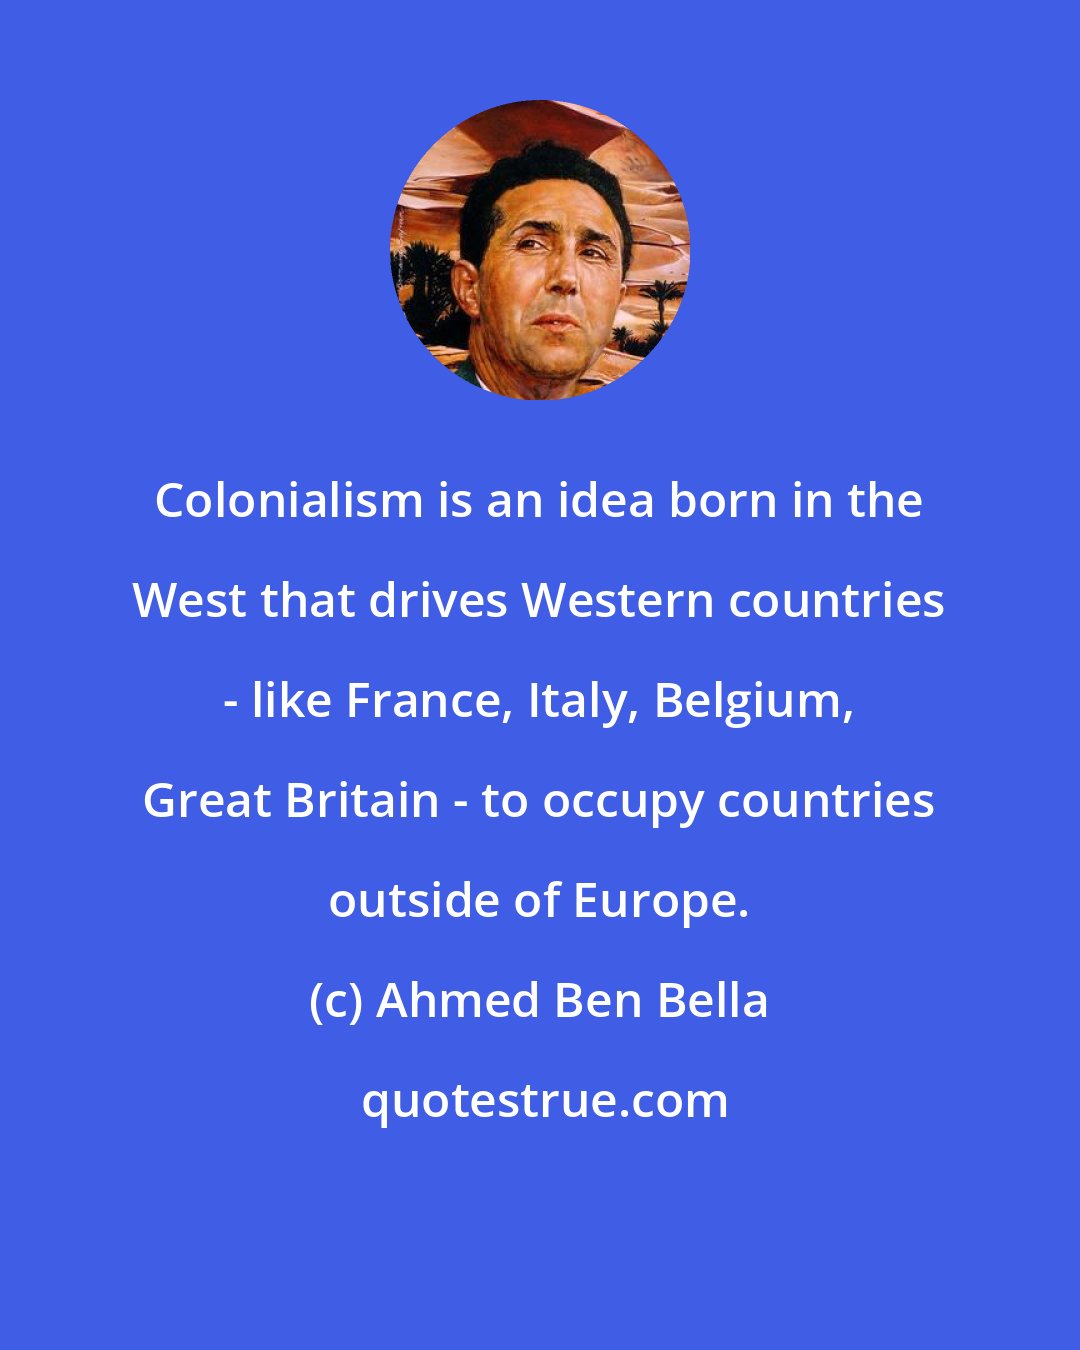 Ahmed Ben Bella: Colonialism is an idea born in the West that drives Western countries - like France, Italy, Belgium, Great Britain - to occupy countries outside of Europe.